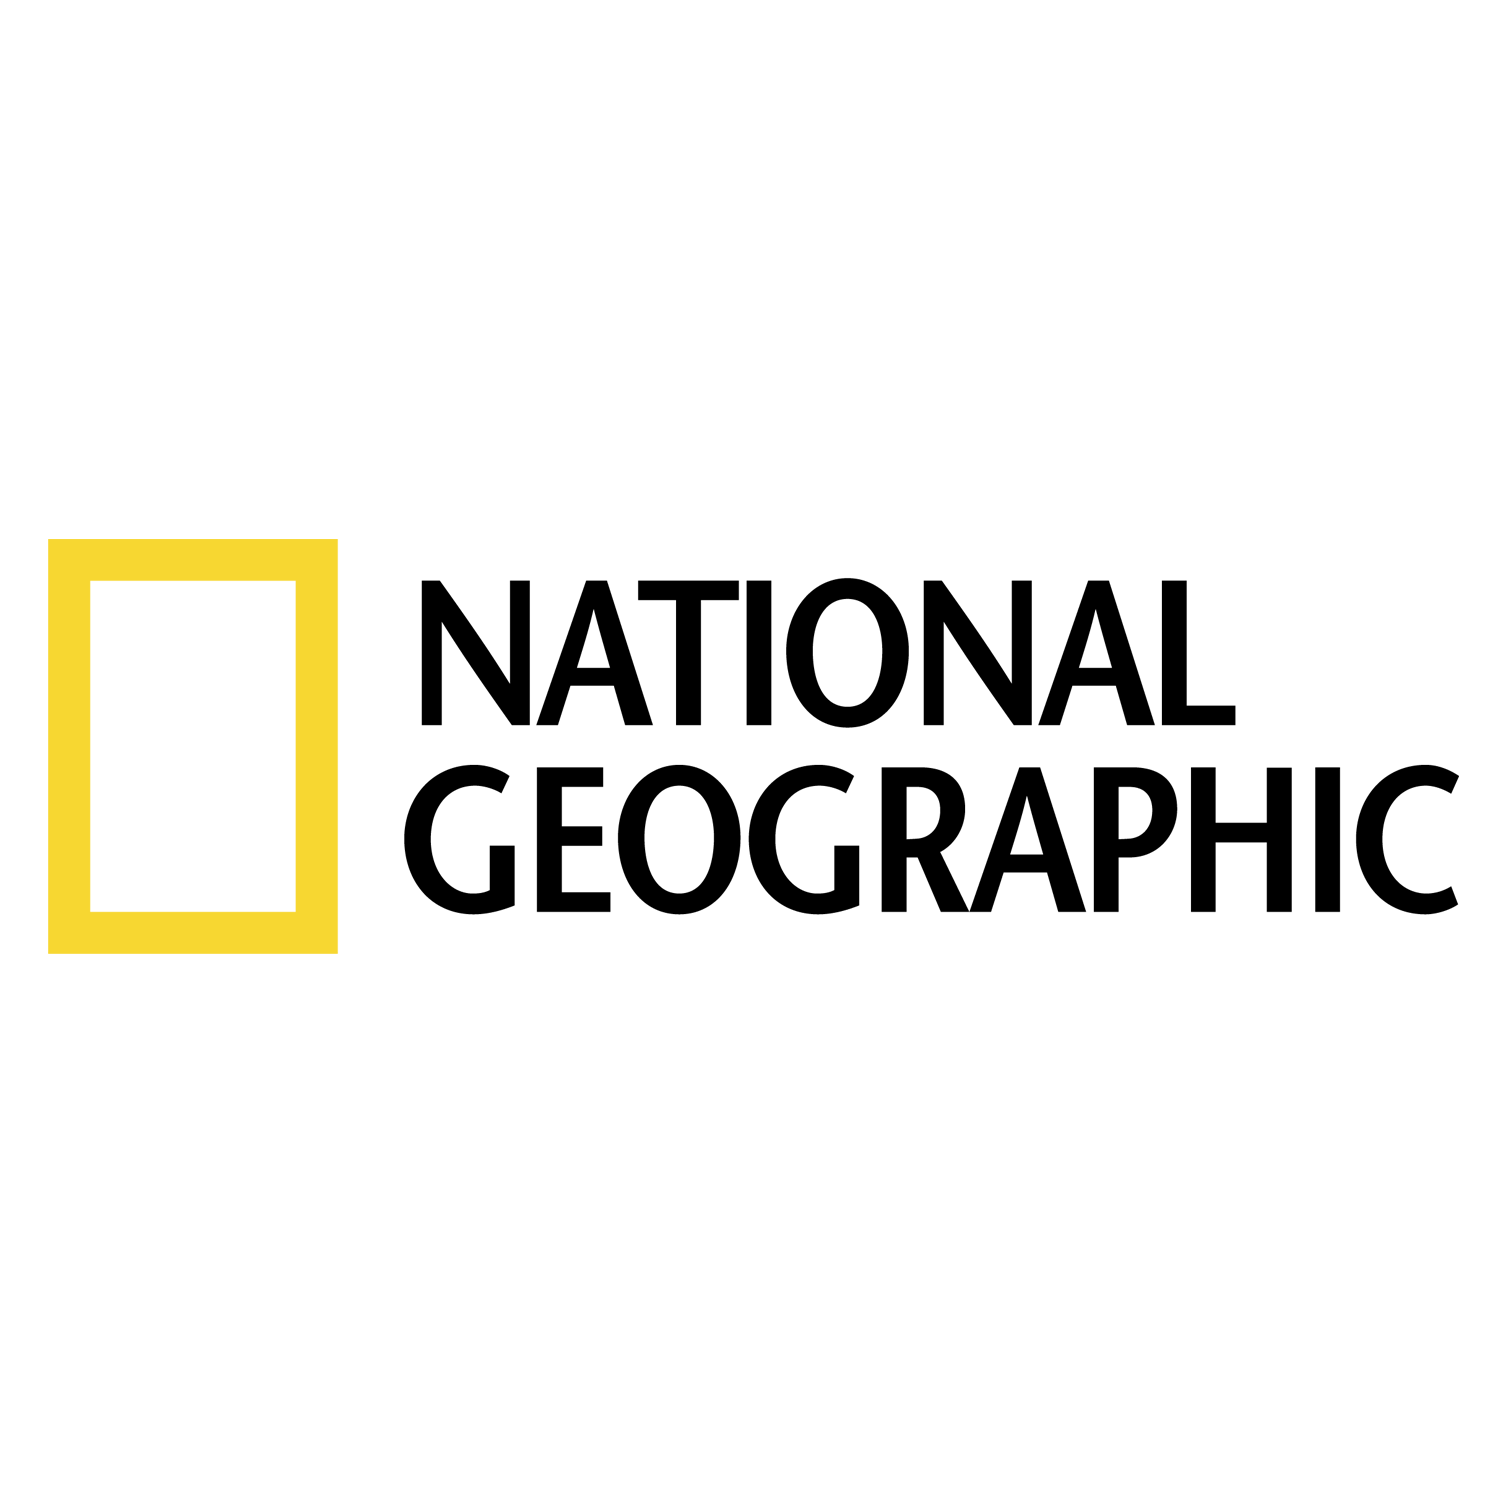 . Hdpng.com Logo Design Of National Geographic Below With Transparent Background And Vector File Including Png. This Logo Can Be Used For Ideas And Inspiration Hdpng.com  - Nat Geo Vector, Transparent background PNG HD thumbnail